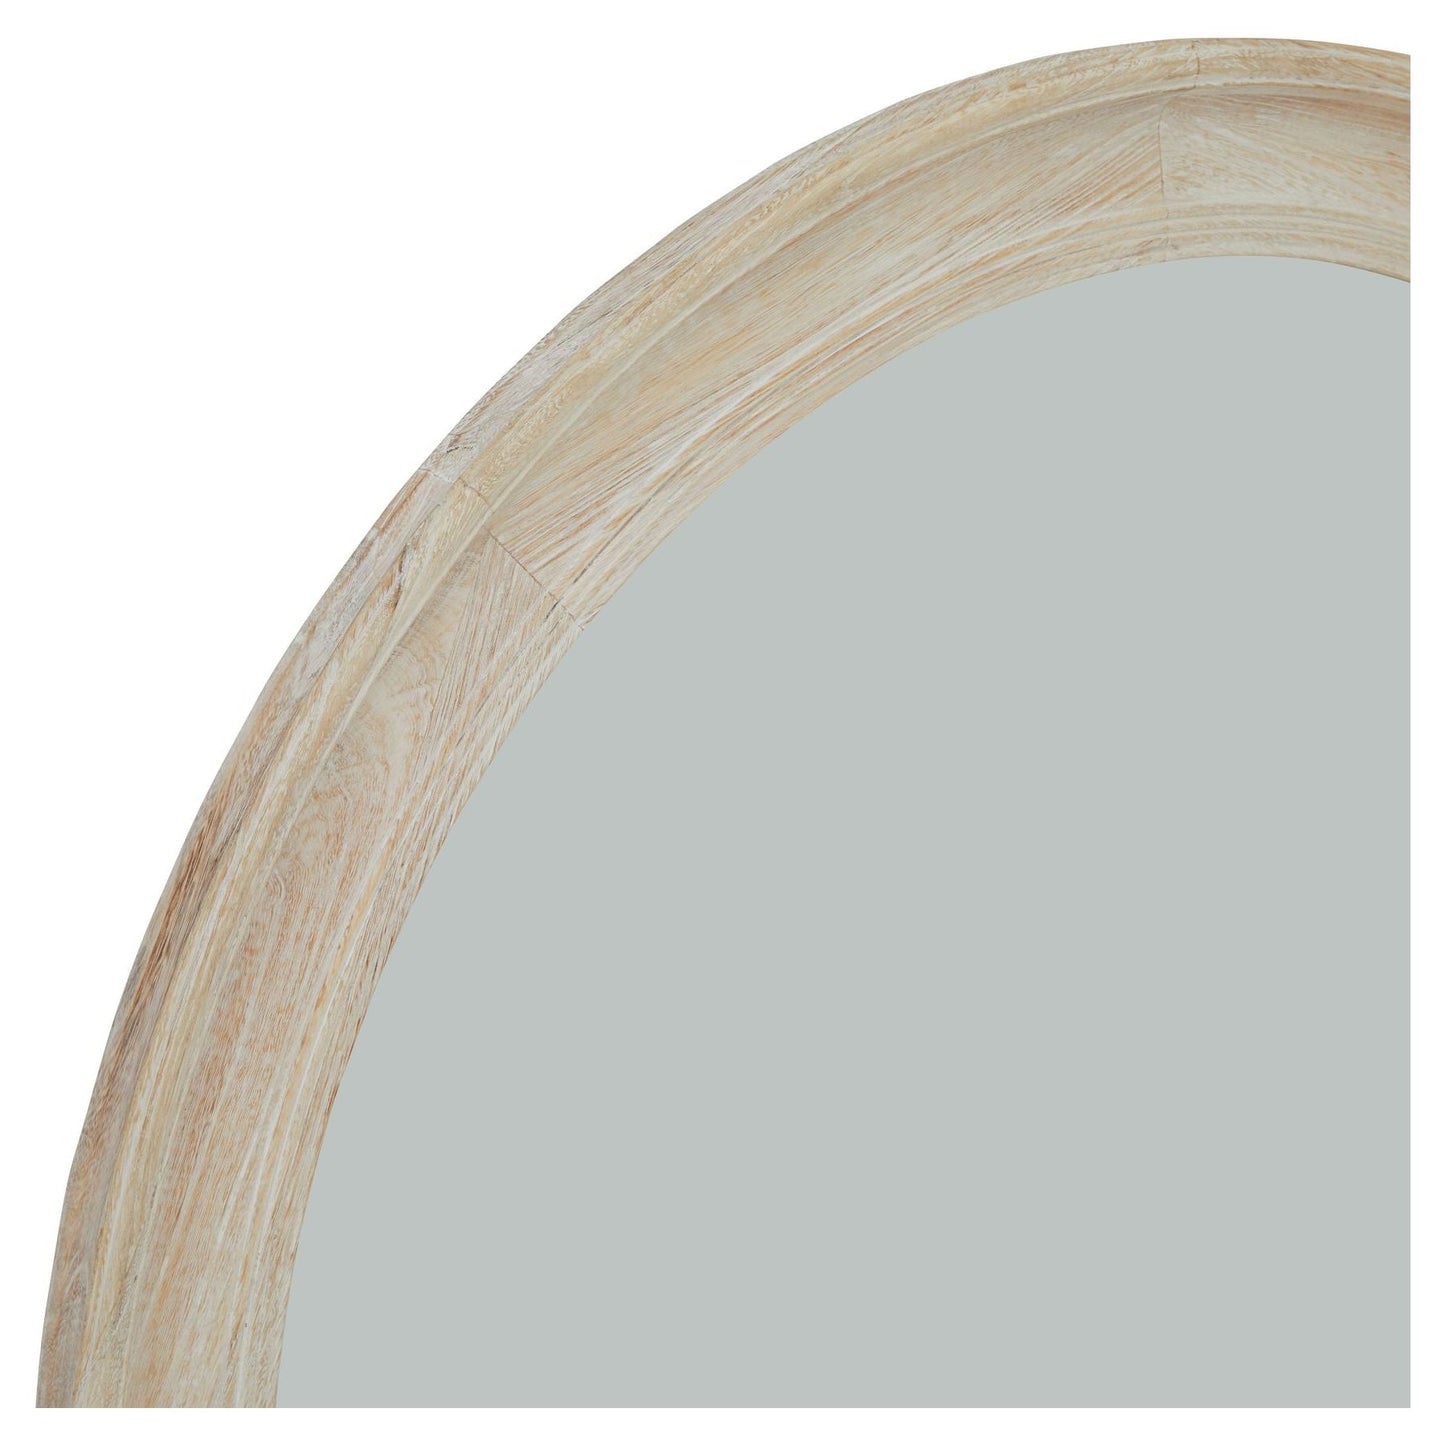 Washed Wood Round Framed Large Mirror - Ashton and Finch